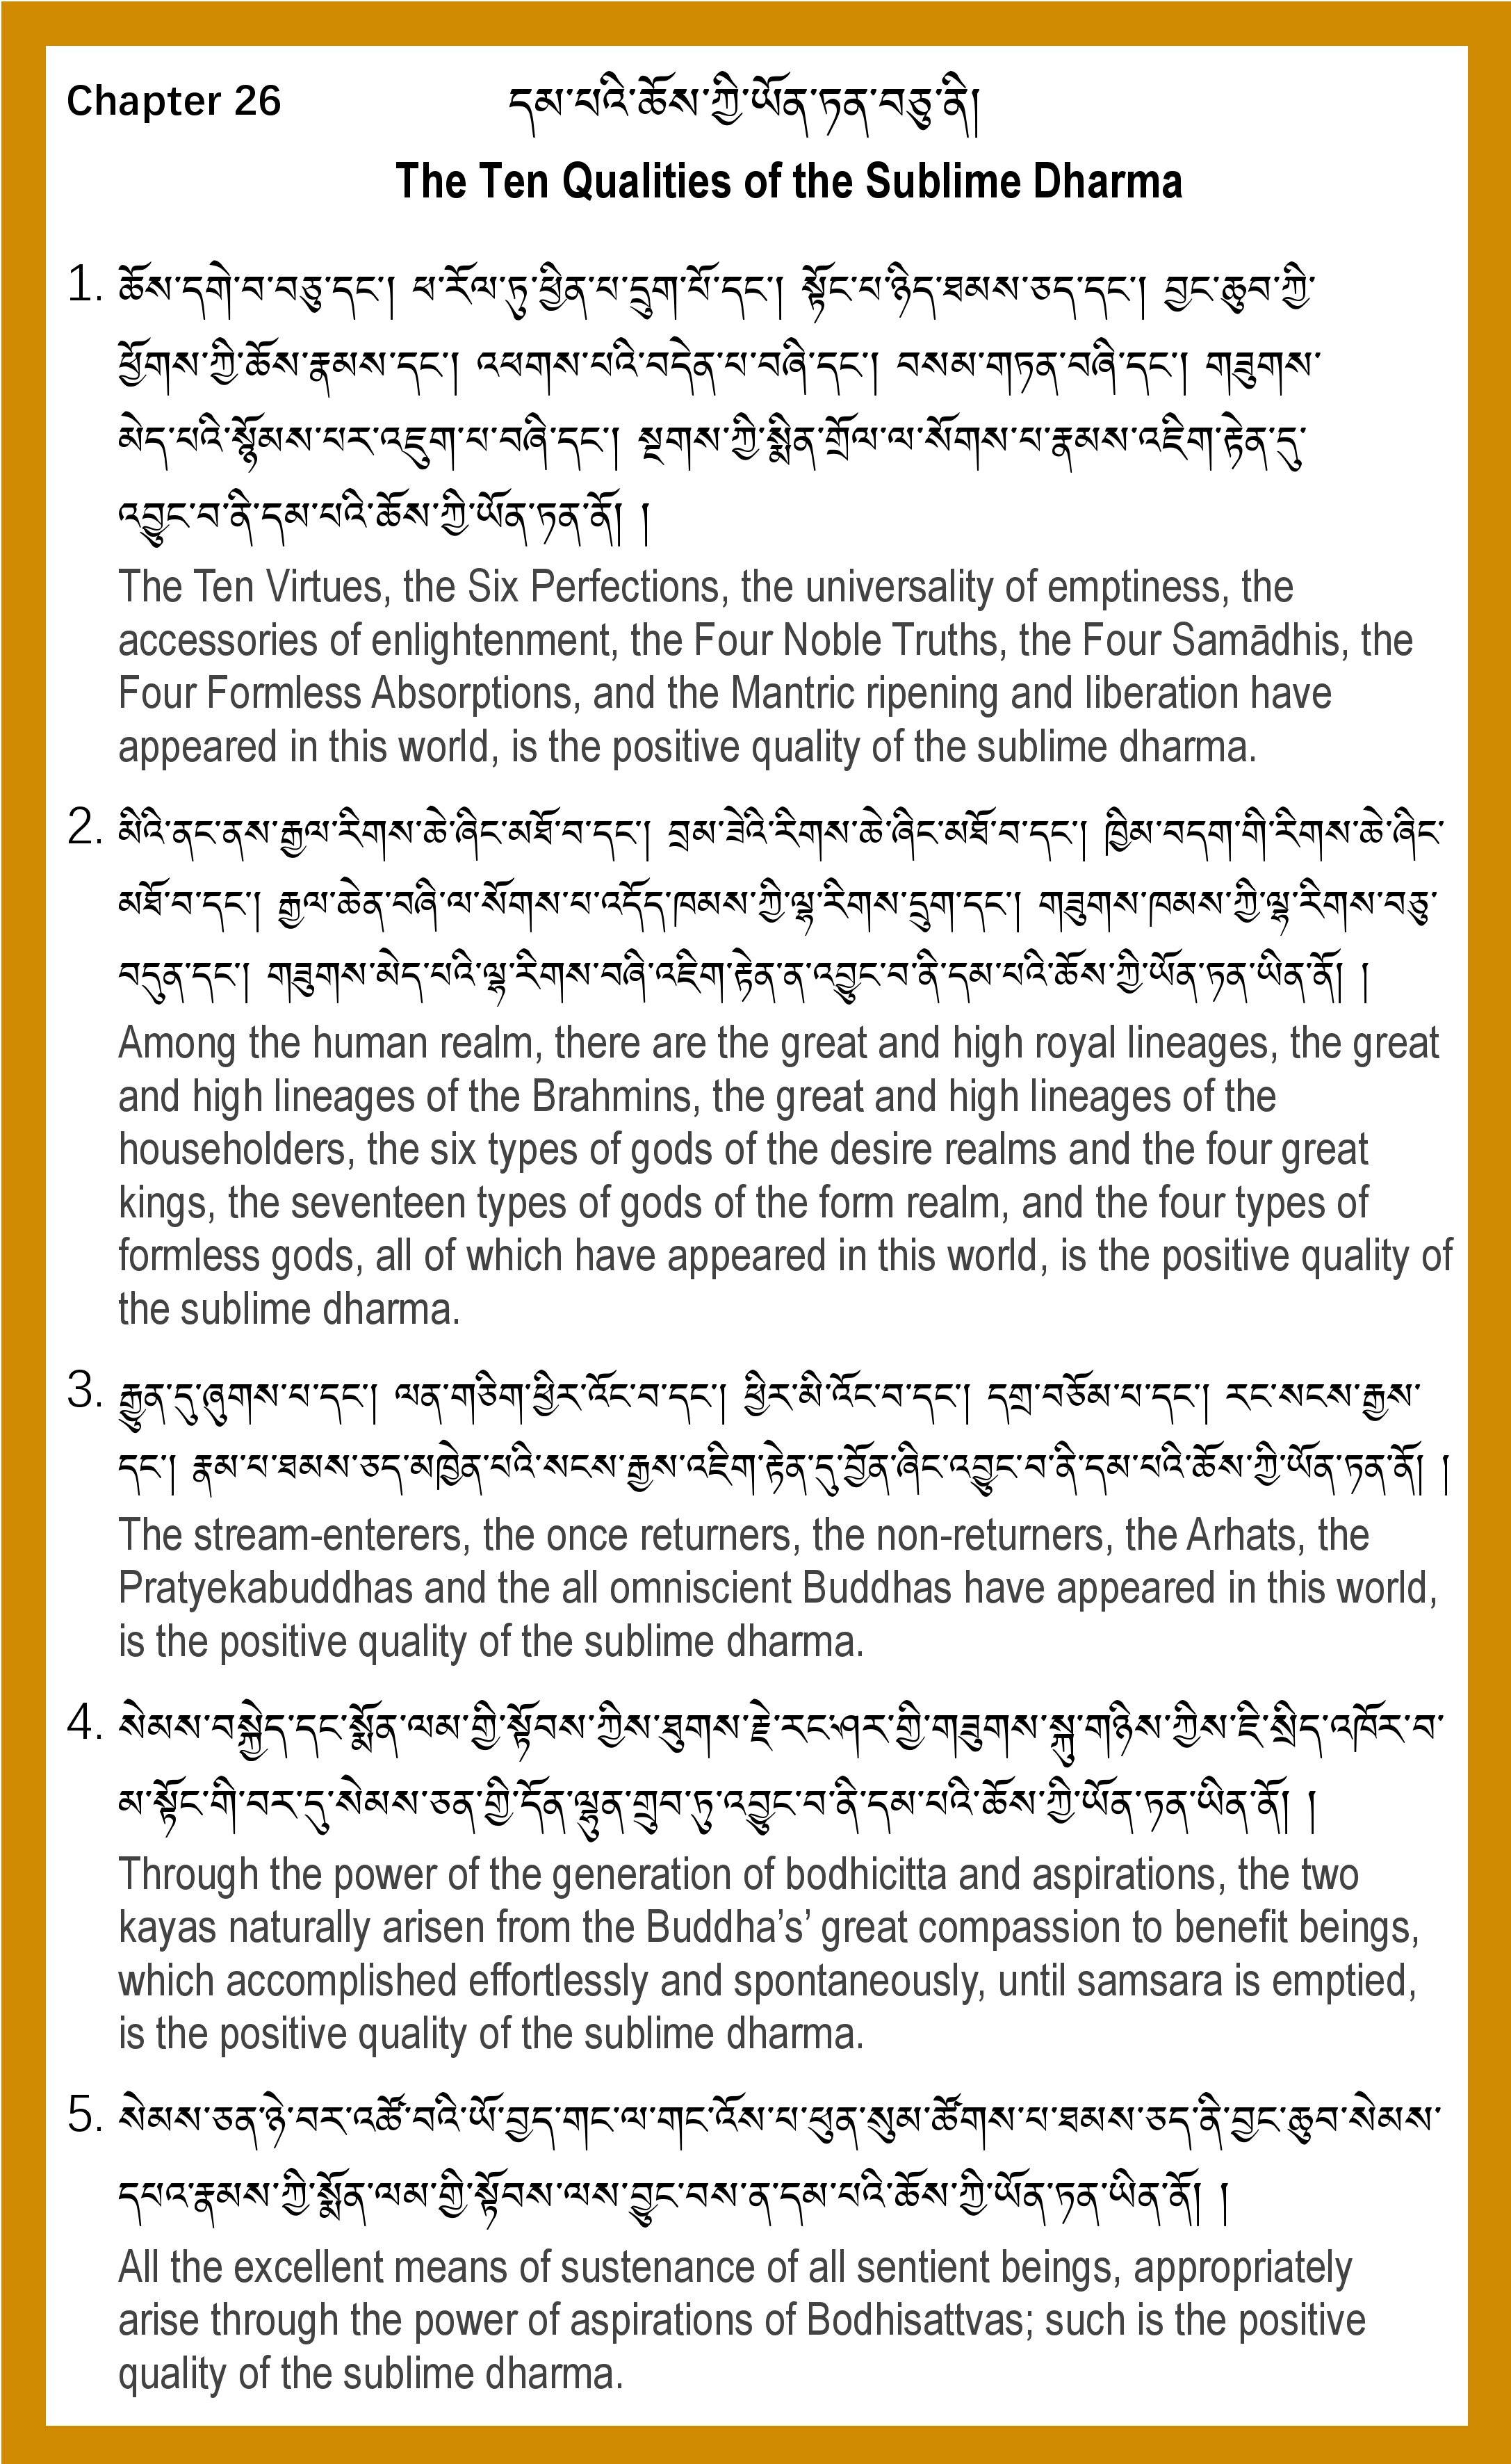 26-PGSP-The 10 Qualities of Sublime Dharma0003.jpg